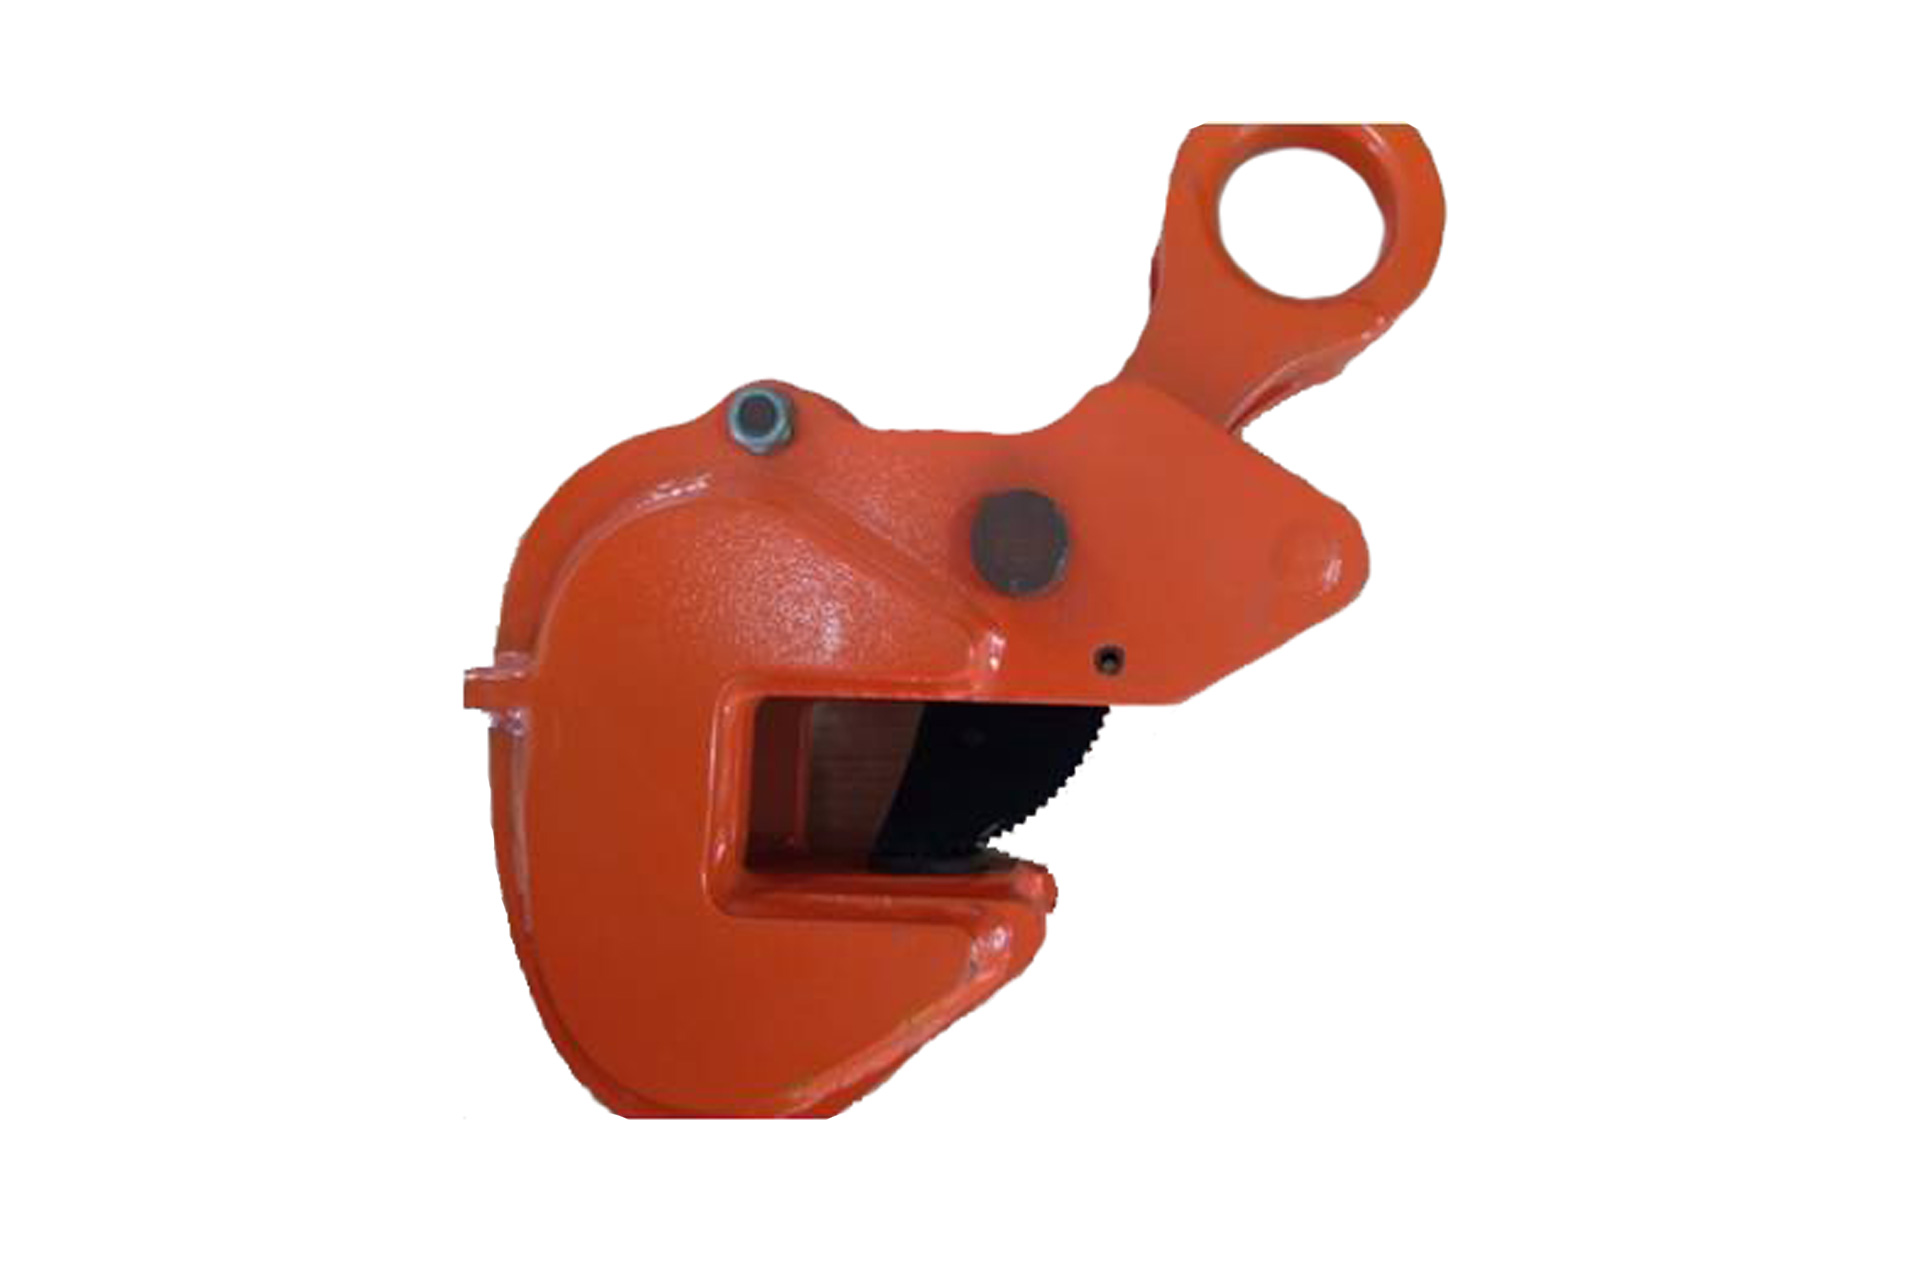 Horizontal plate lifting clamp with Safety lock